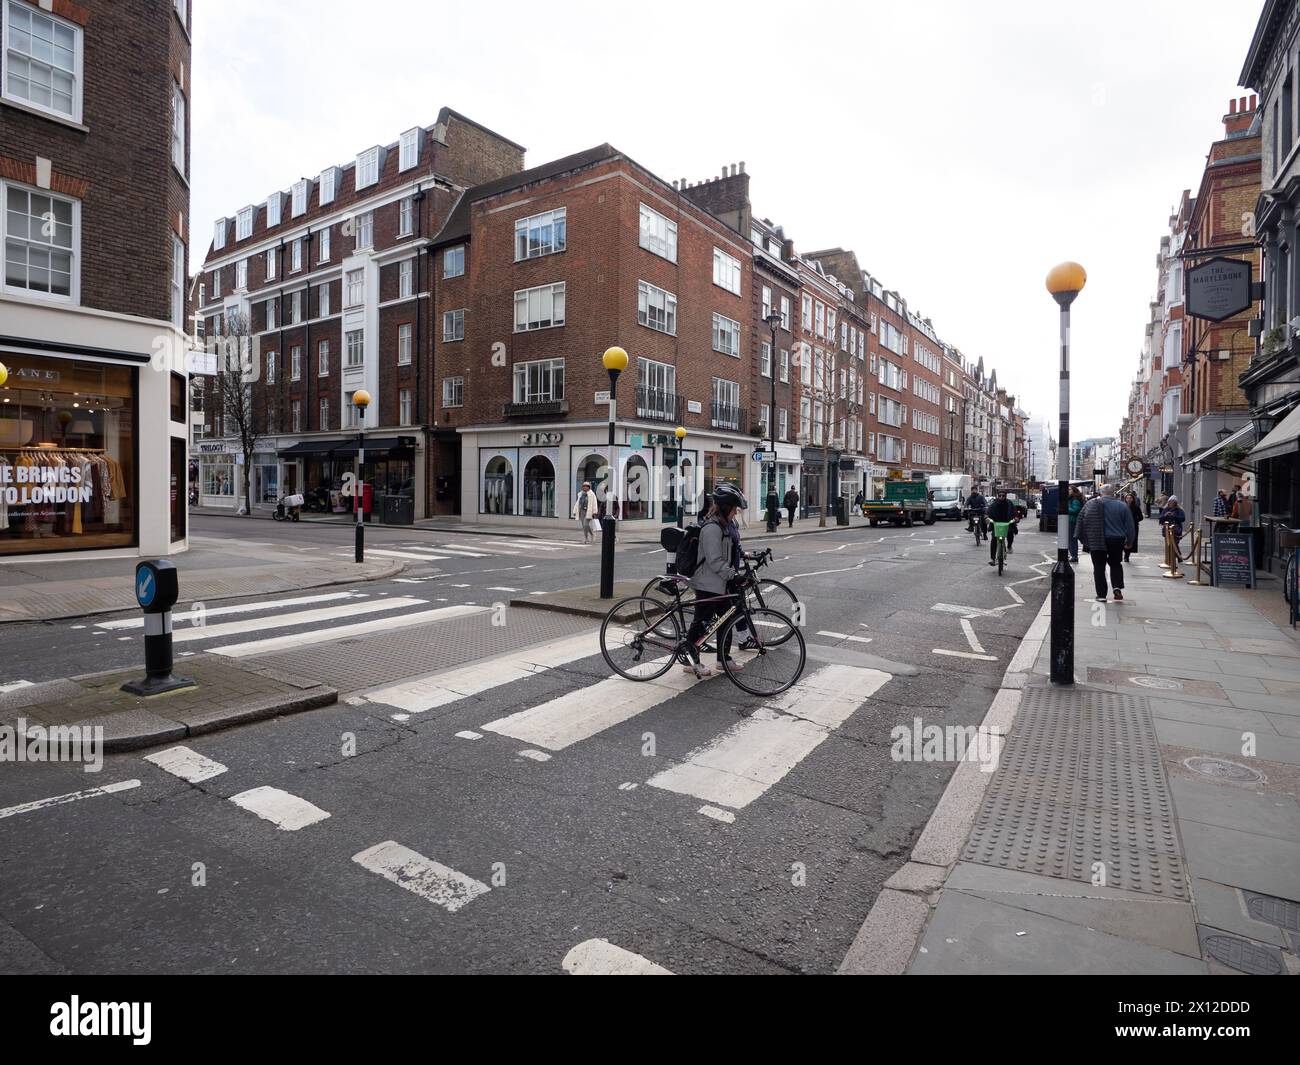 Marylebone high street London with retail shops and  stores with cyclists on  pedestrian crossing in  foreground Stock Photo